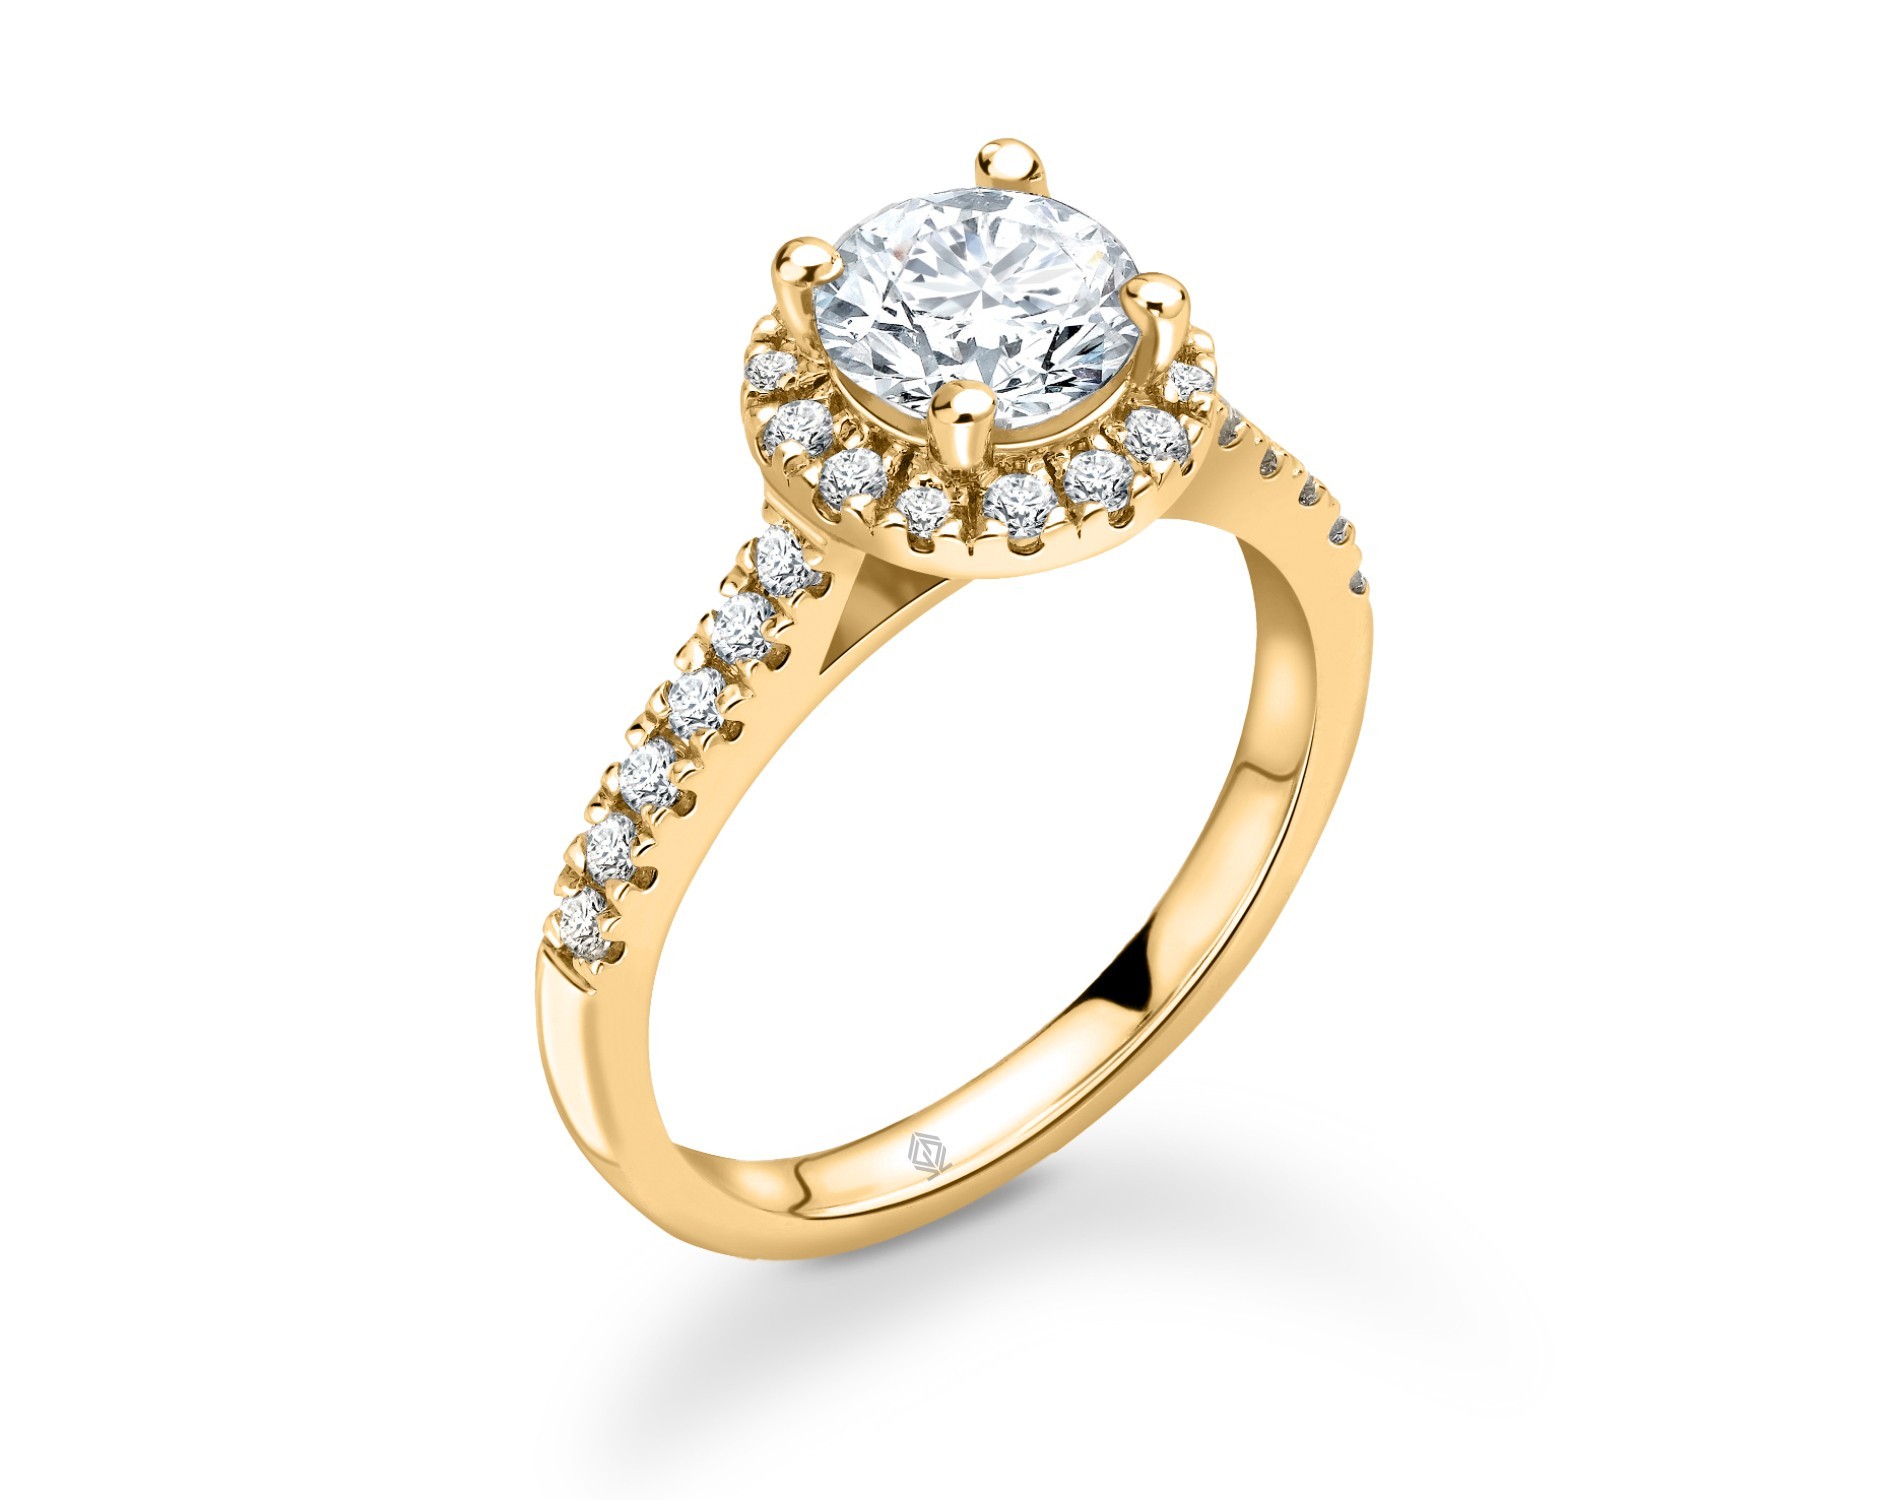 18K YELLOW GOLD ROUND CUT HALO DIAMOND ENGAGEMENT RING WITH SIDE STONES IN PAVE SET